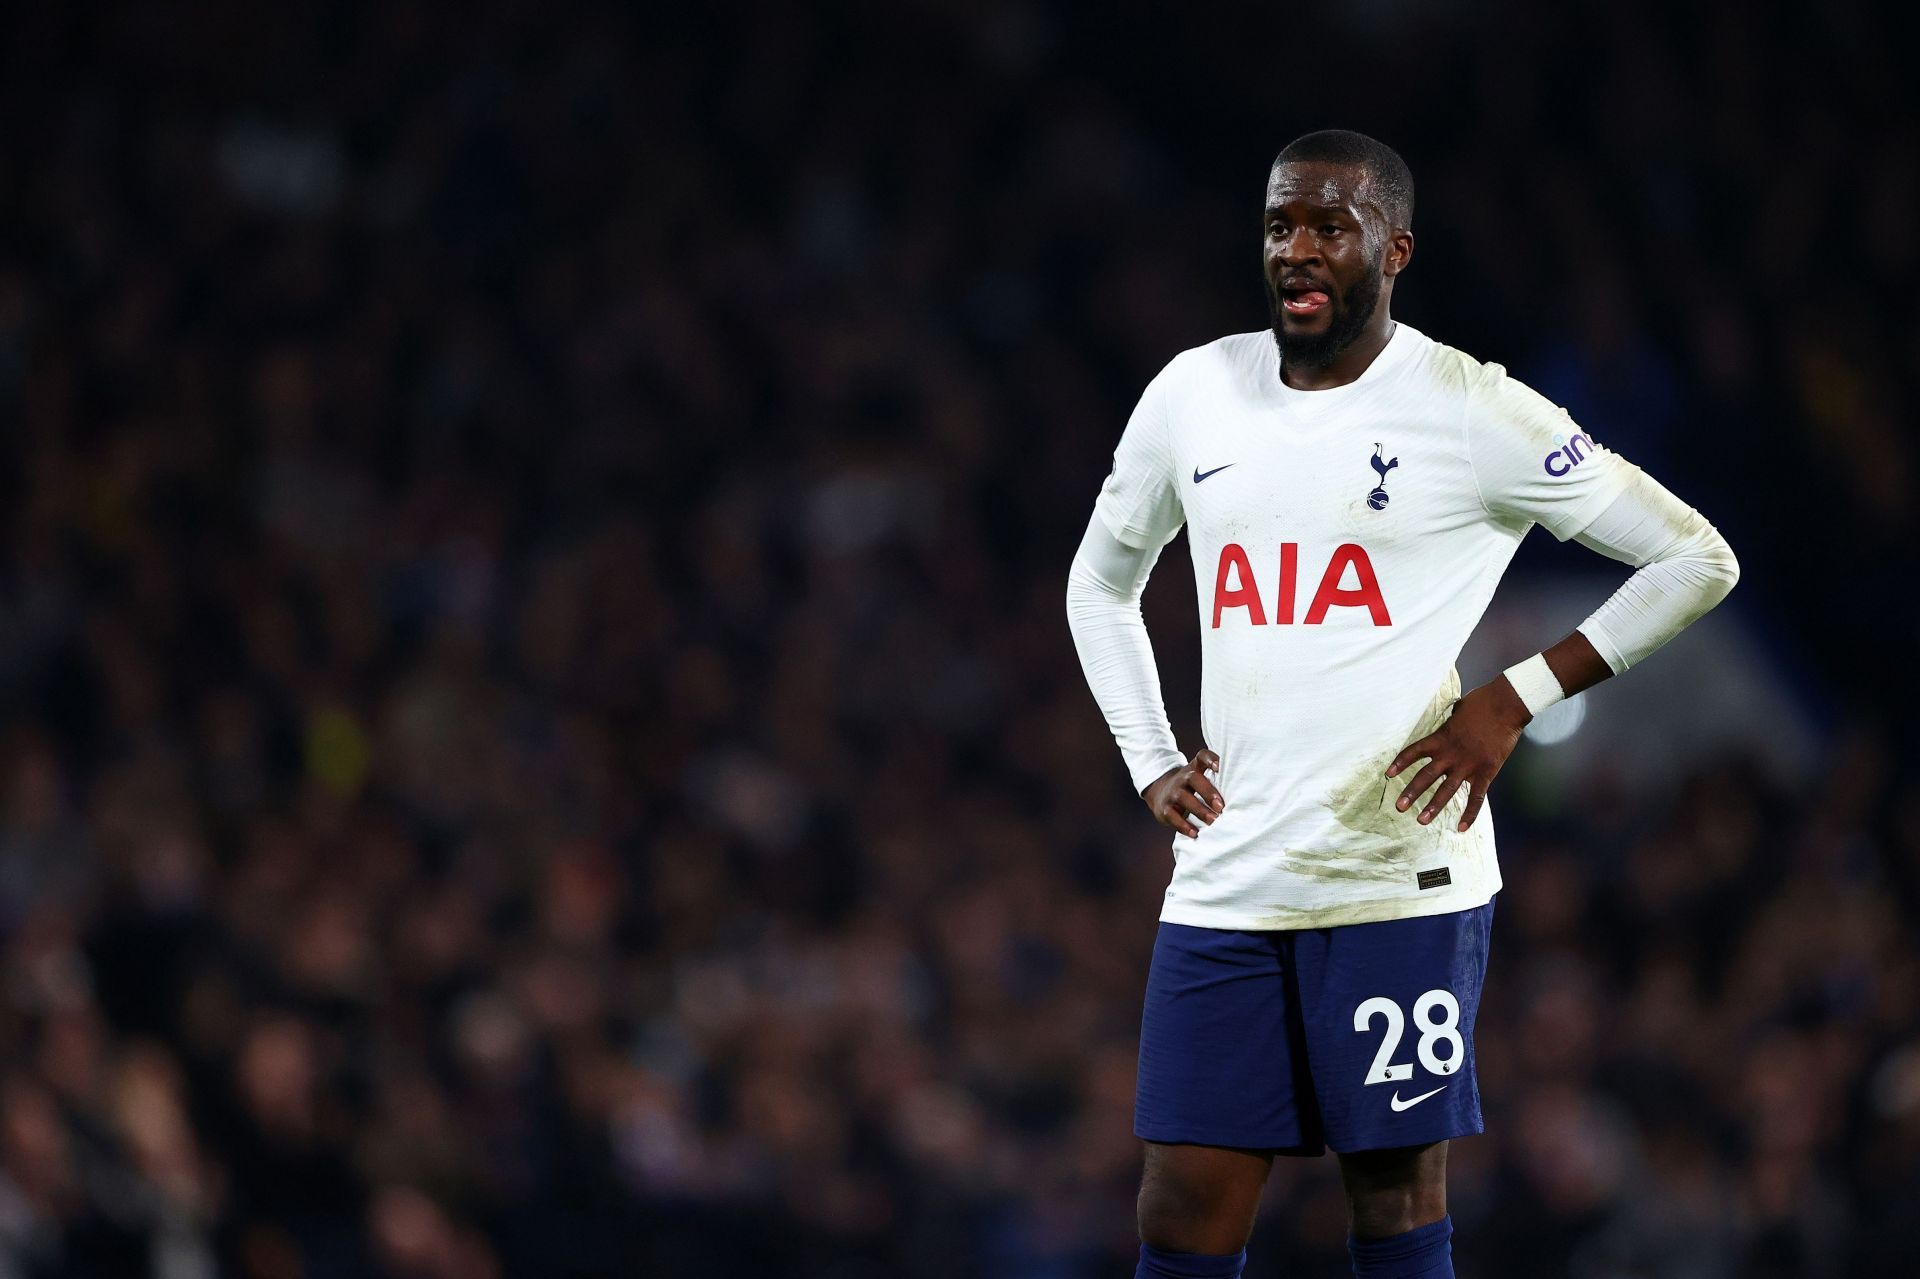 Tanguy Ndombele has rejoined the club where he first gained fame.